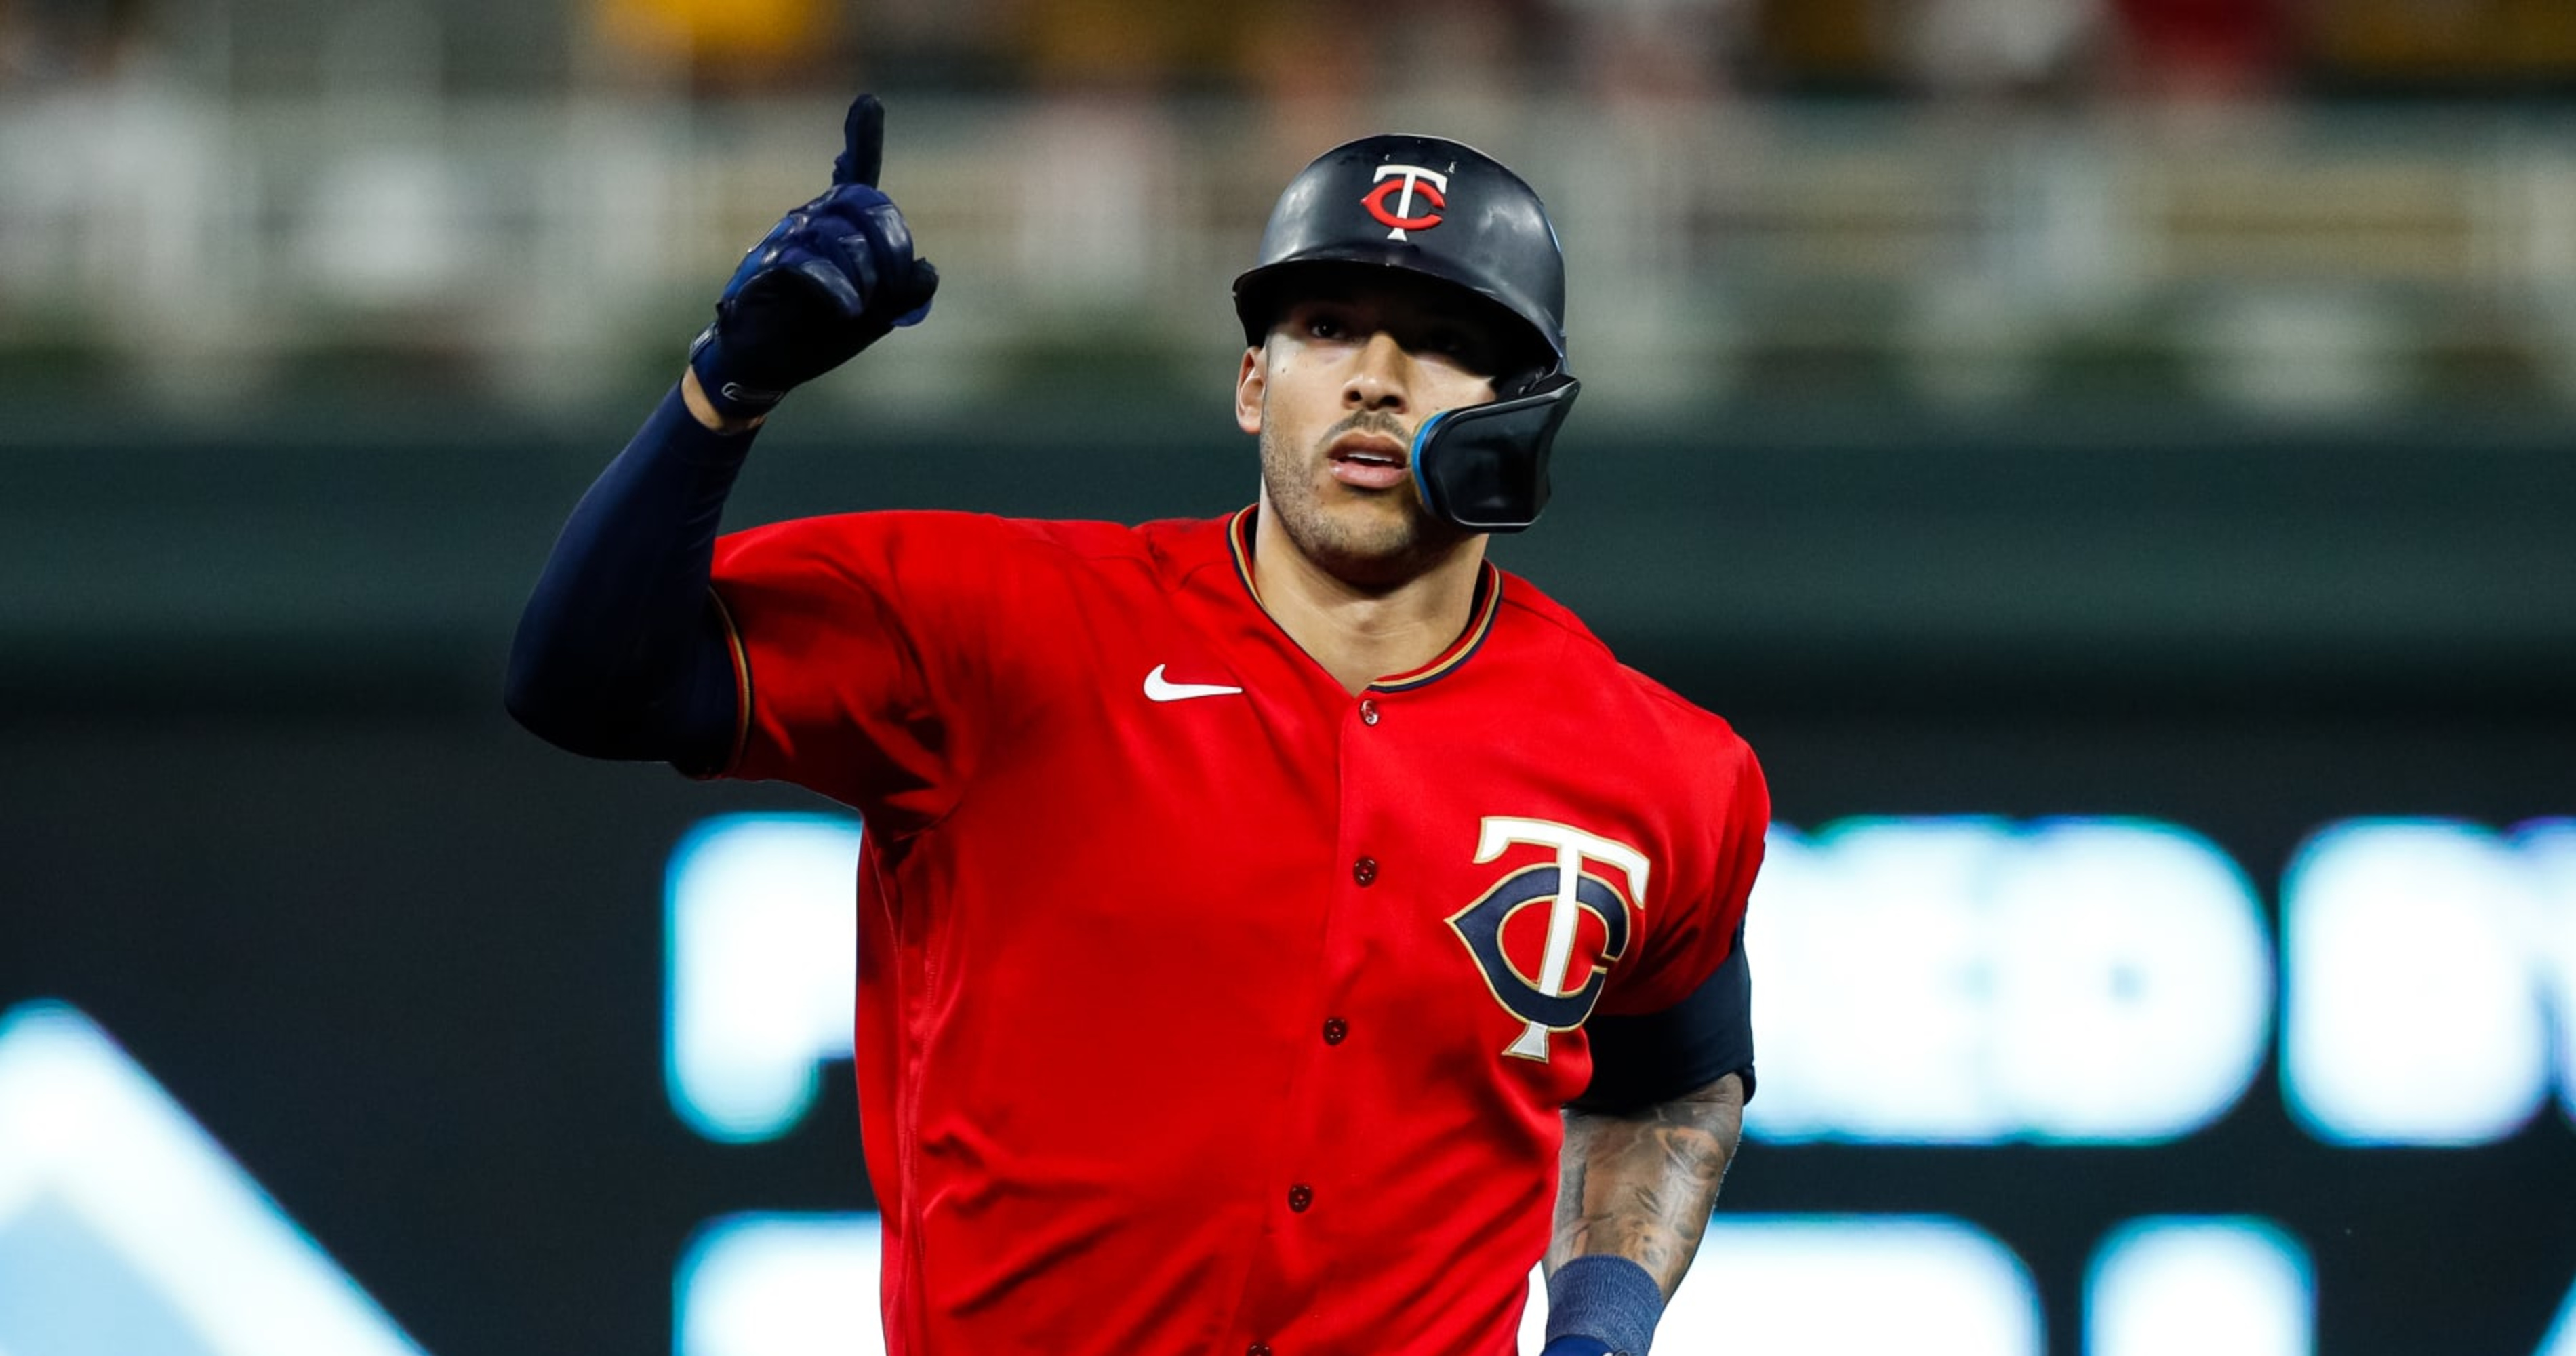 That's pretty wild': Twins players react to Carlos Correa's free